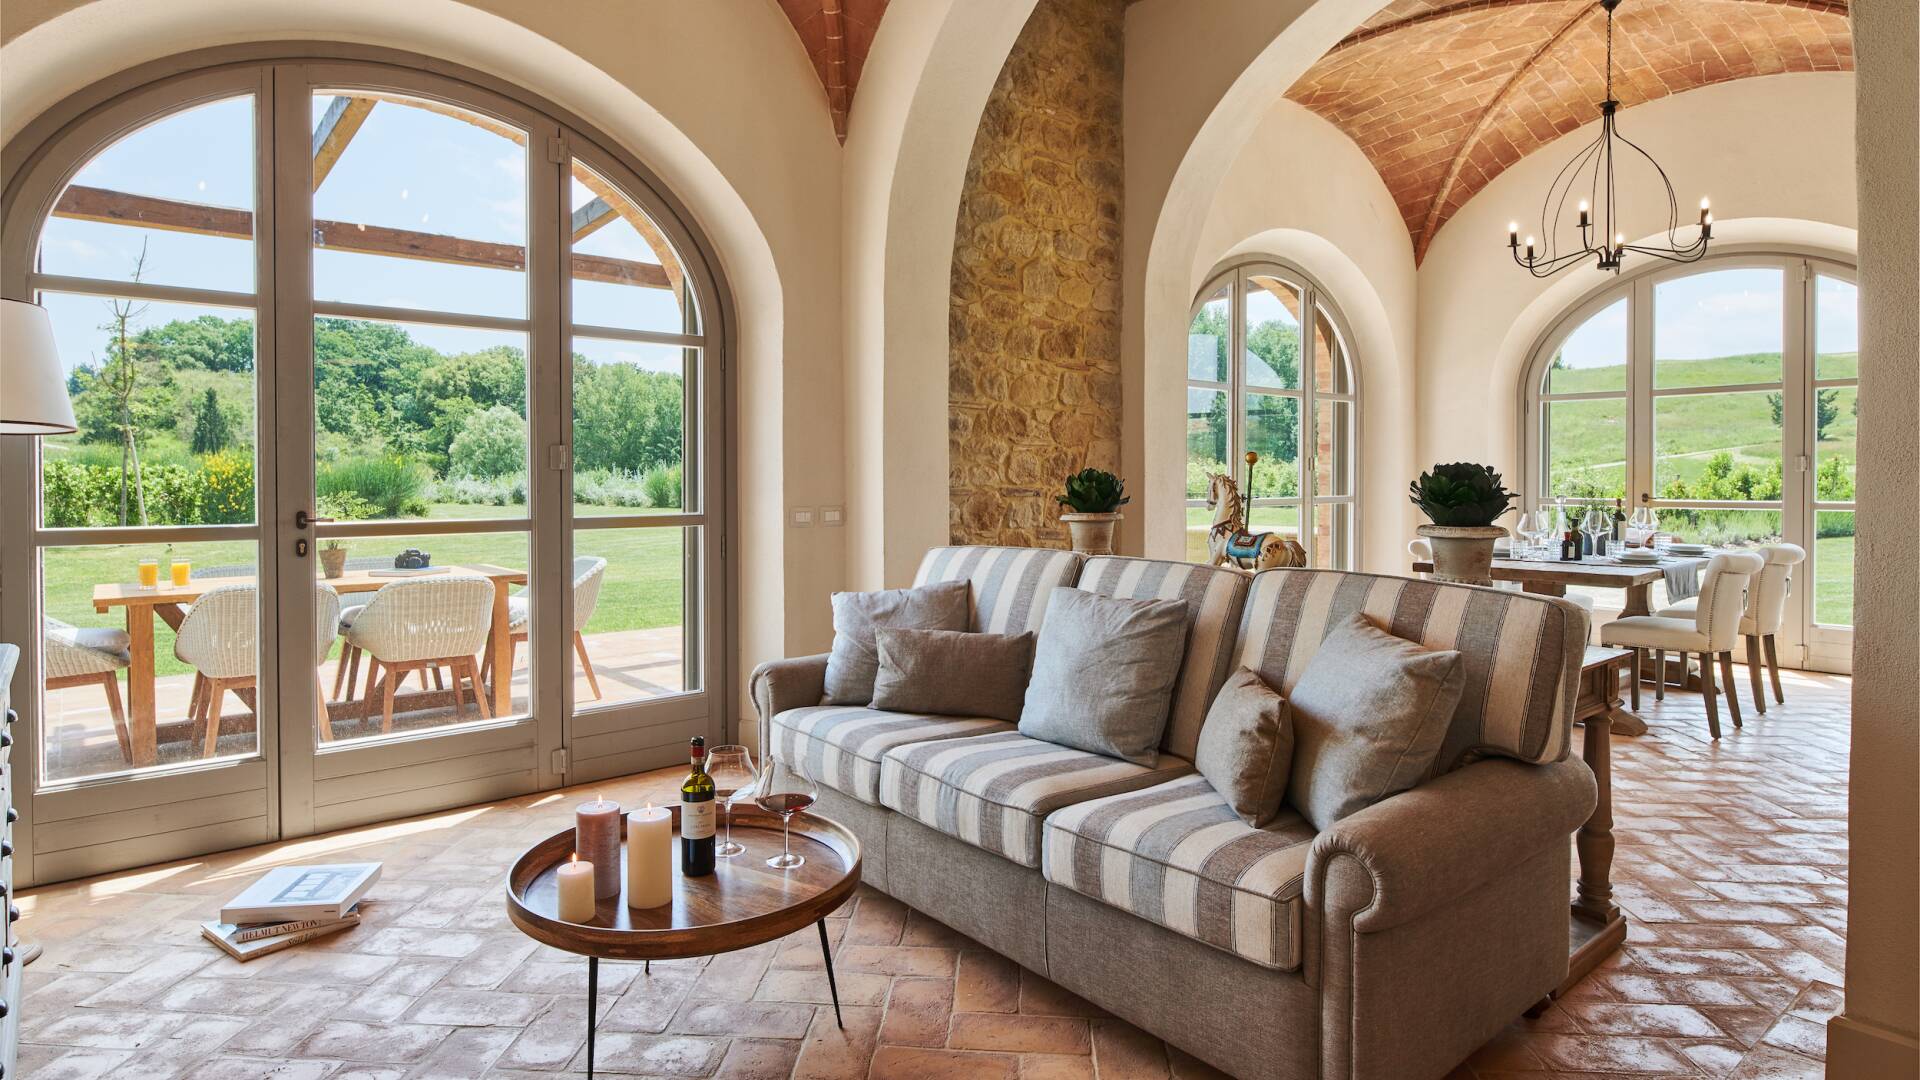 Nespole A, luxury vacation rentals in Tuscany